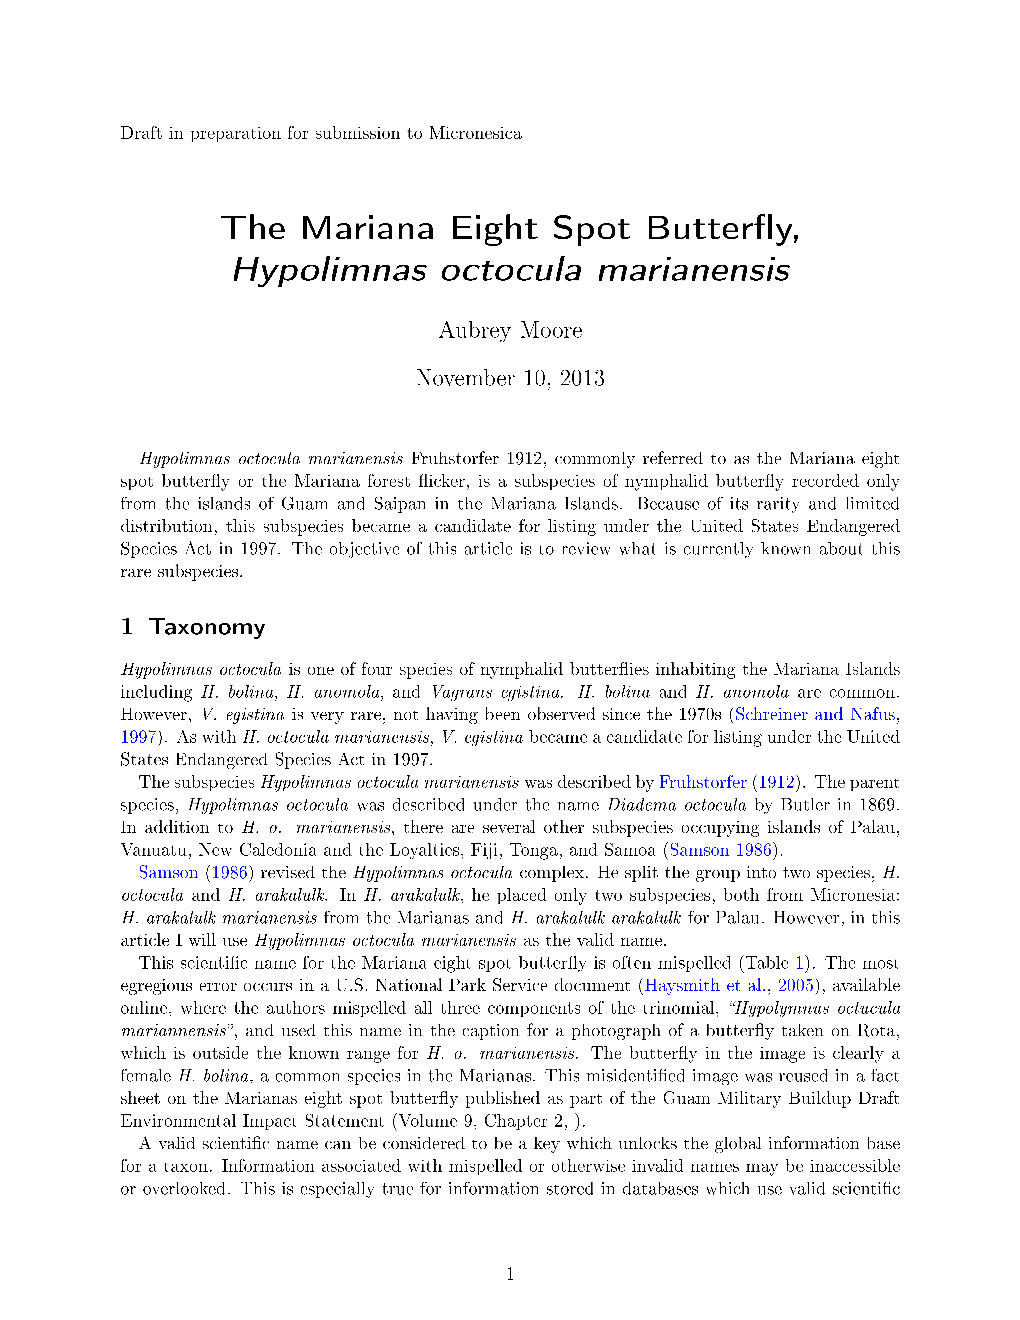 The Mariana Eight Spot Butterfly, Hypolimnas Octocula Marianensis